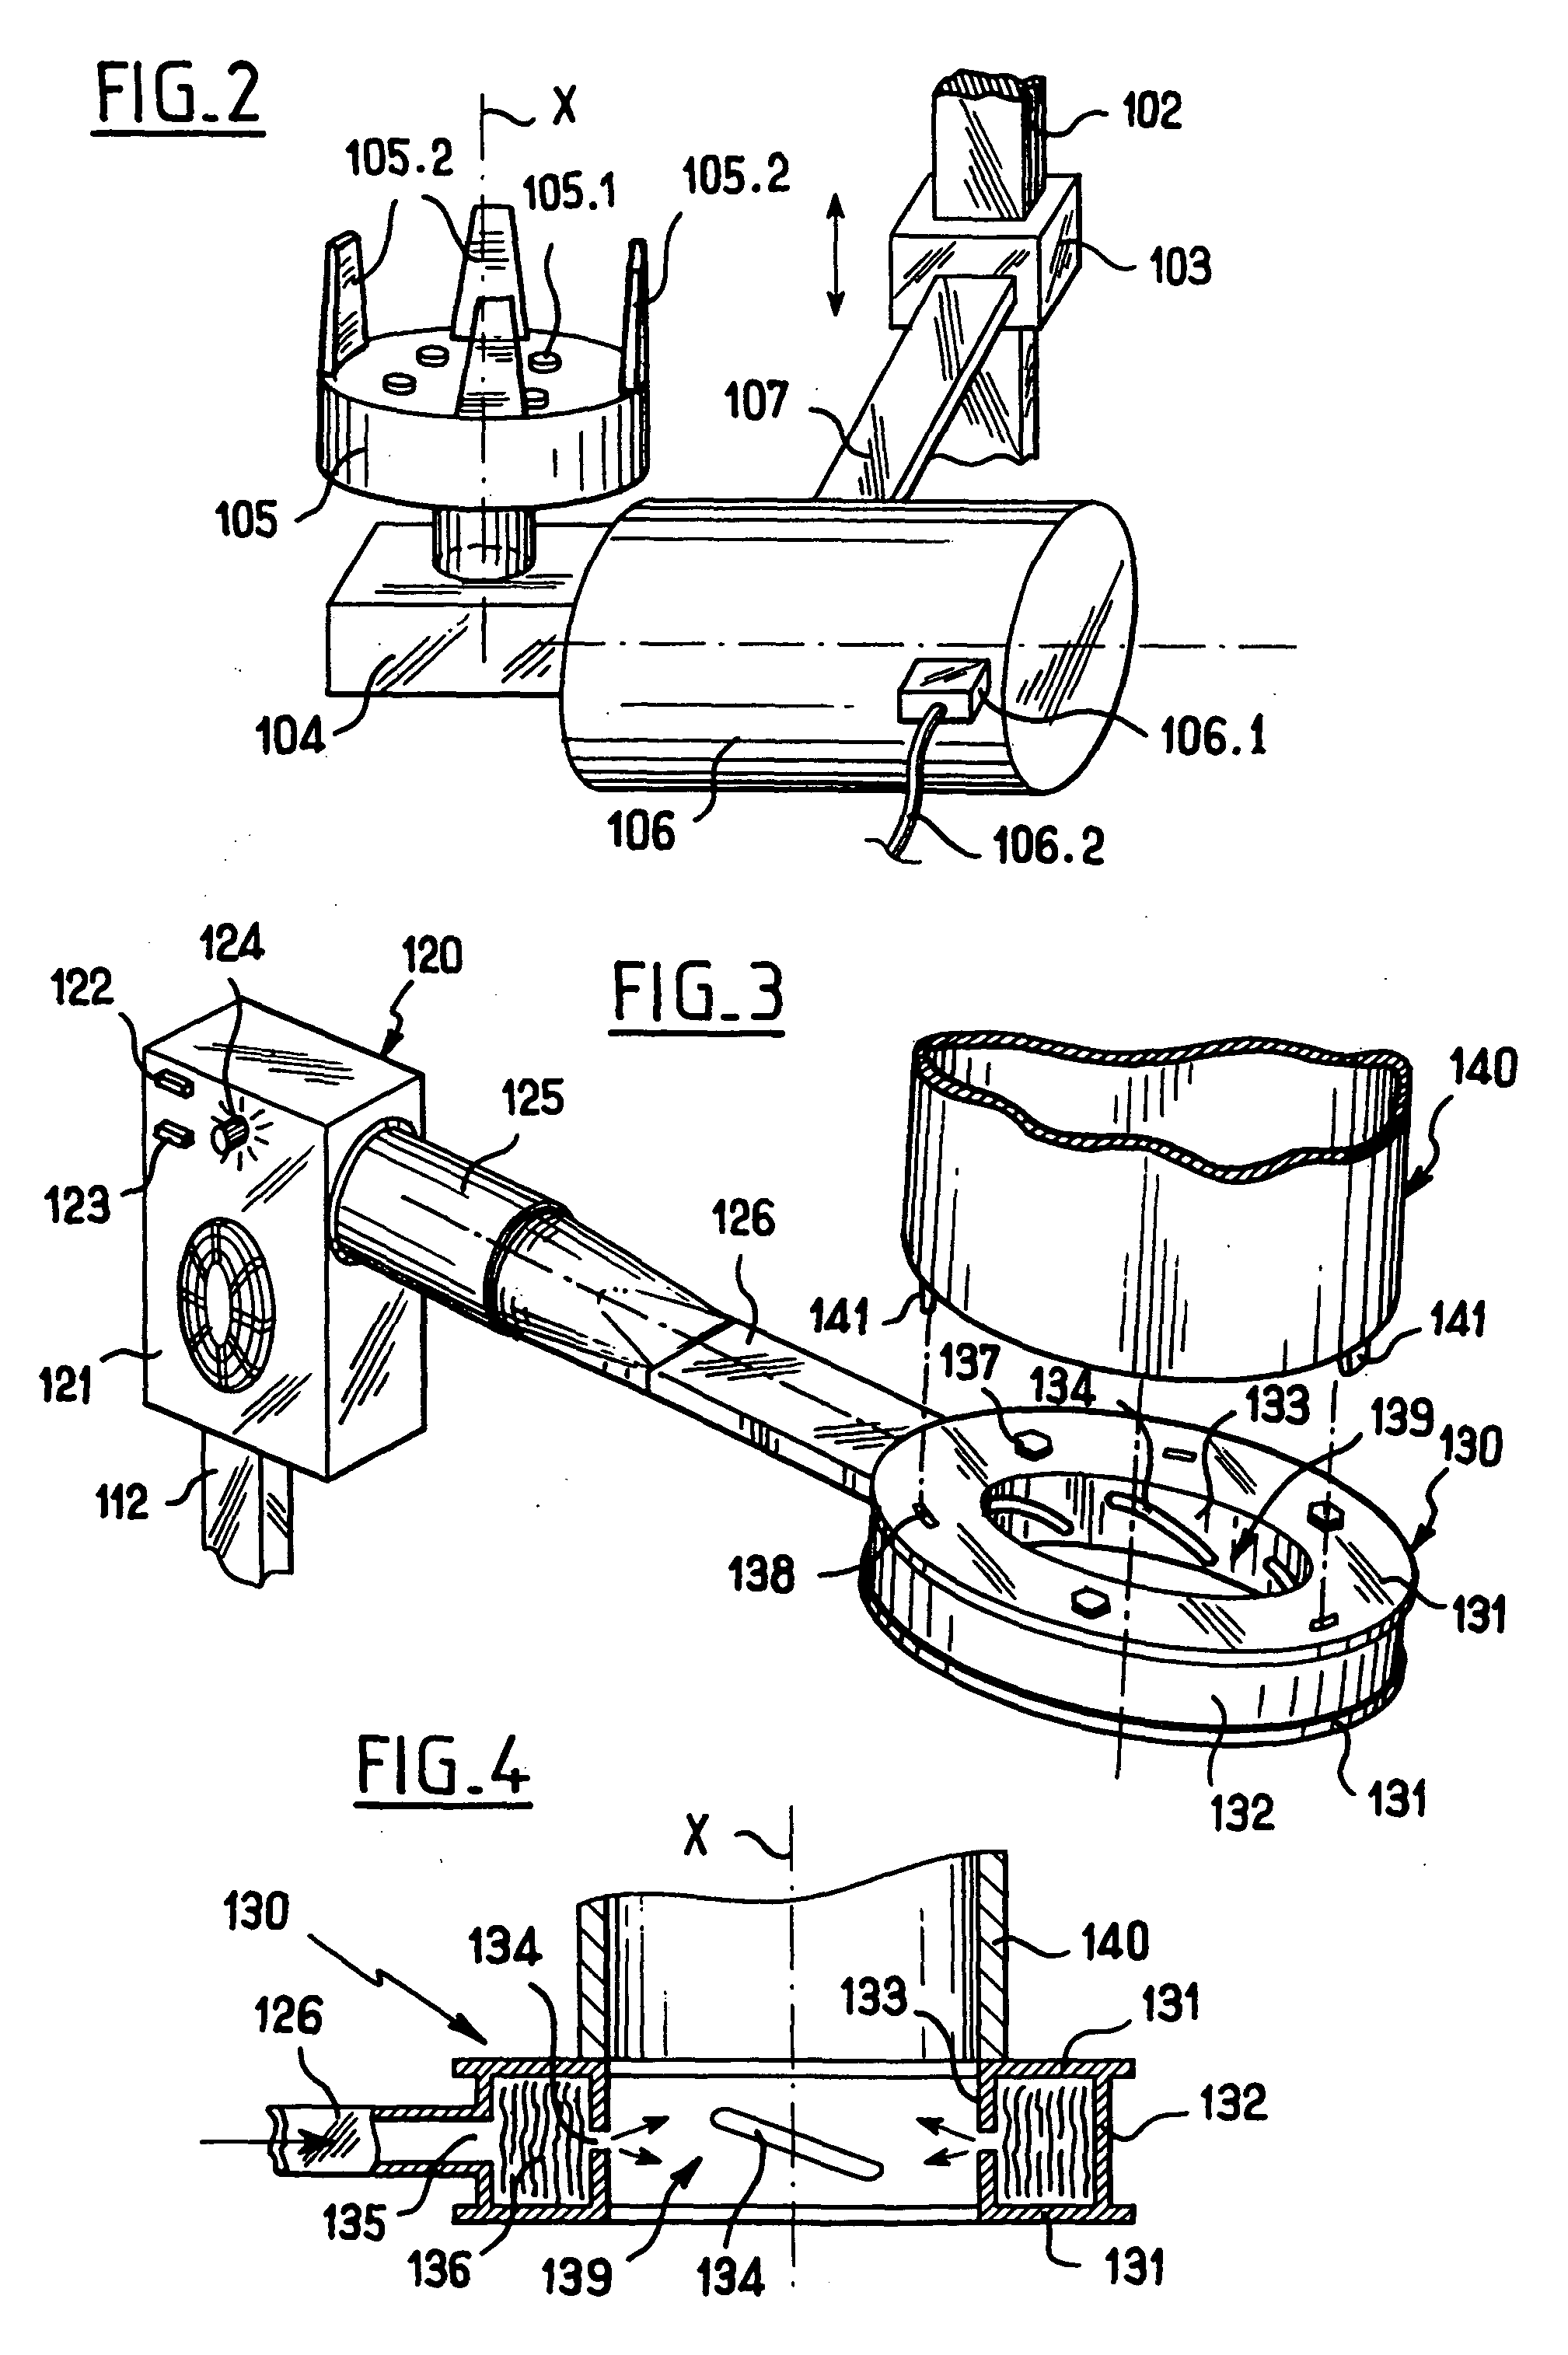 Method and a machine for heat-shrinking heat-shrink sleeves engaged individually on articles such as bottles